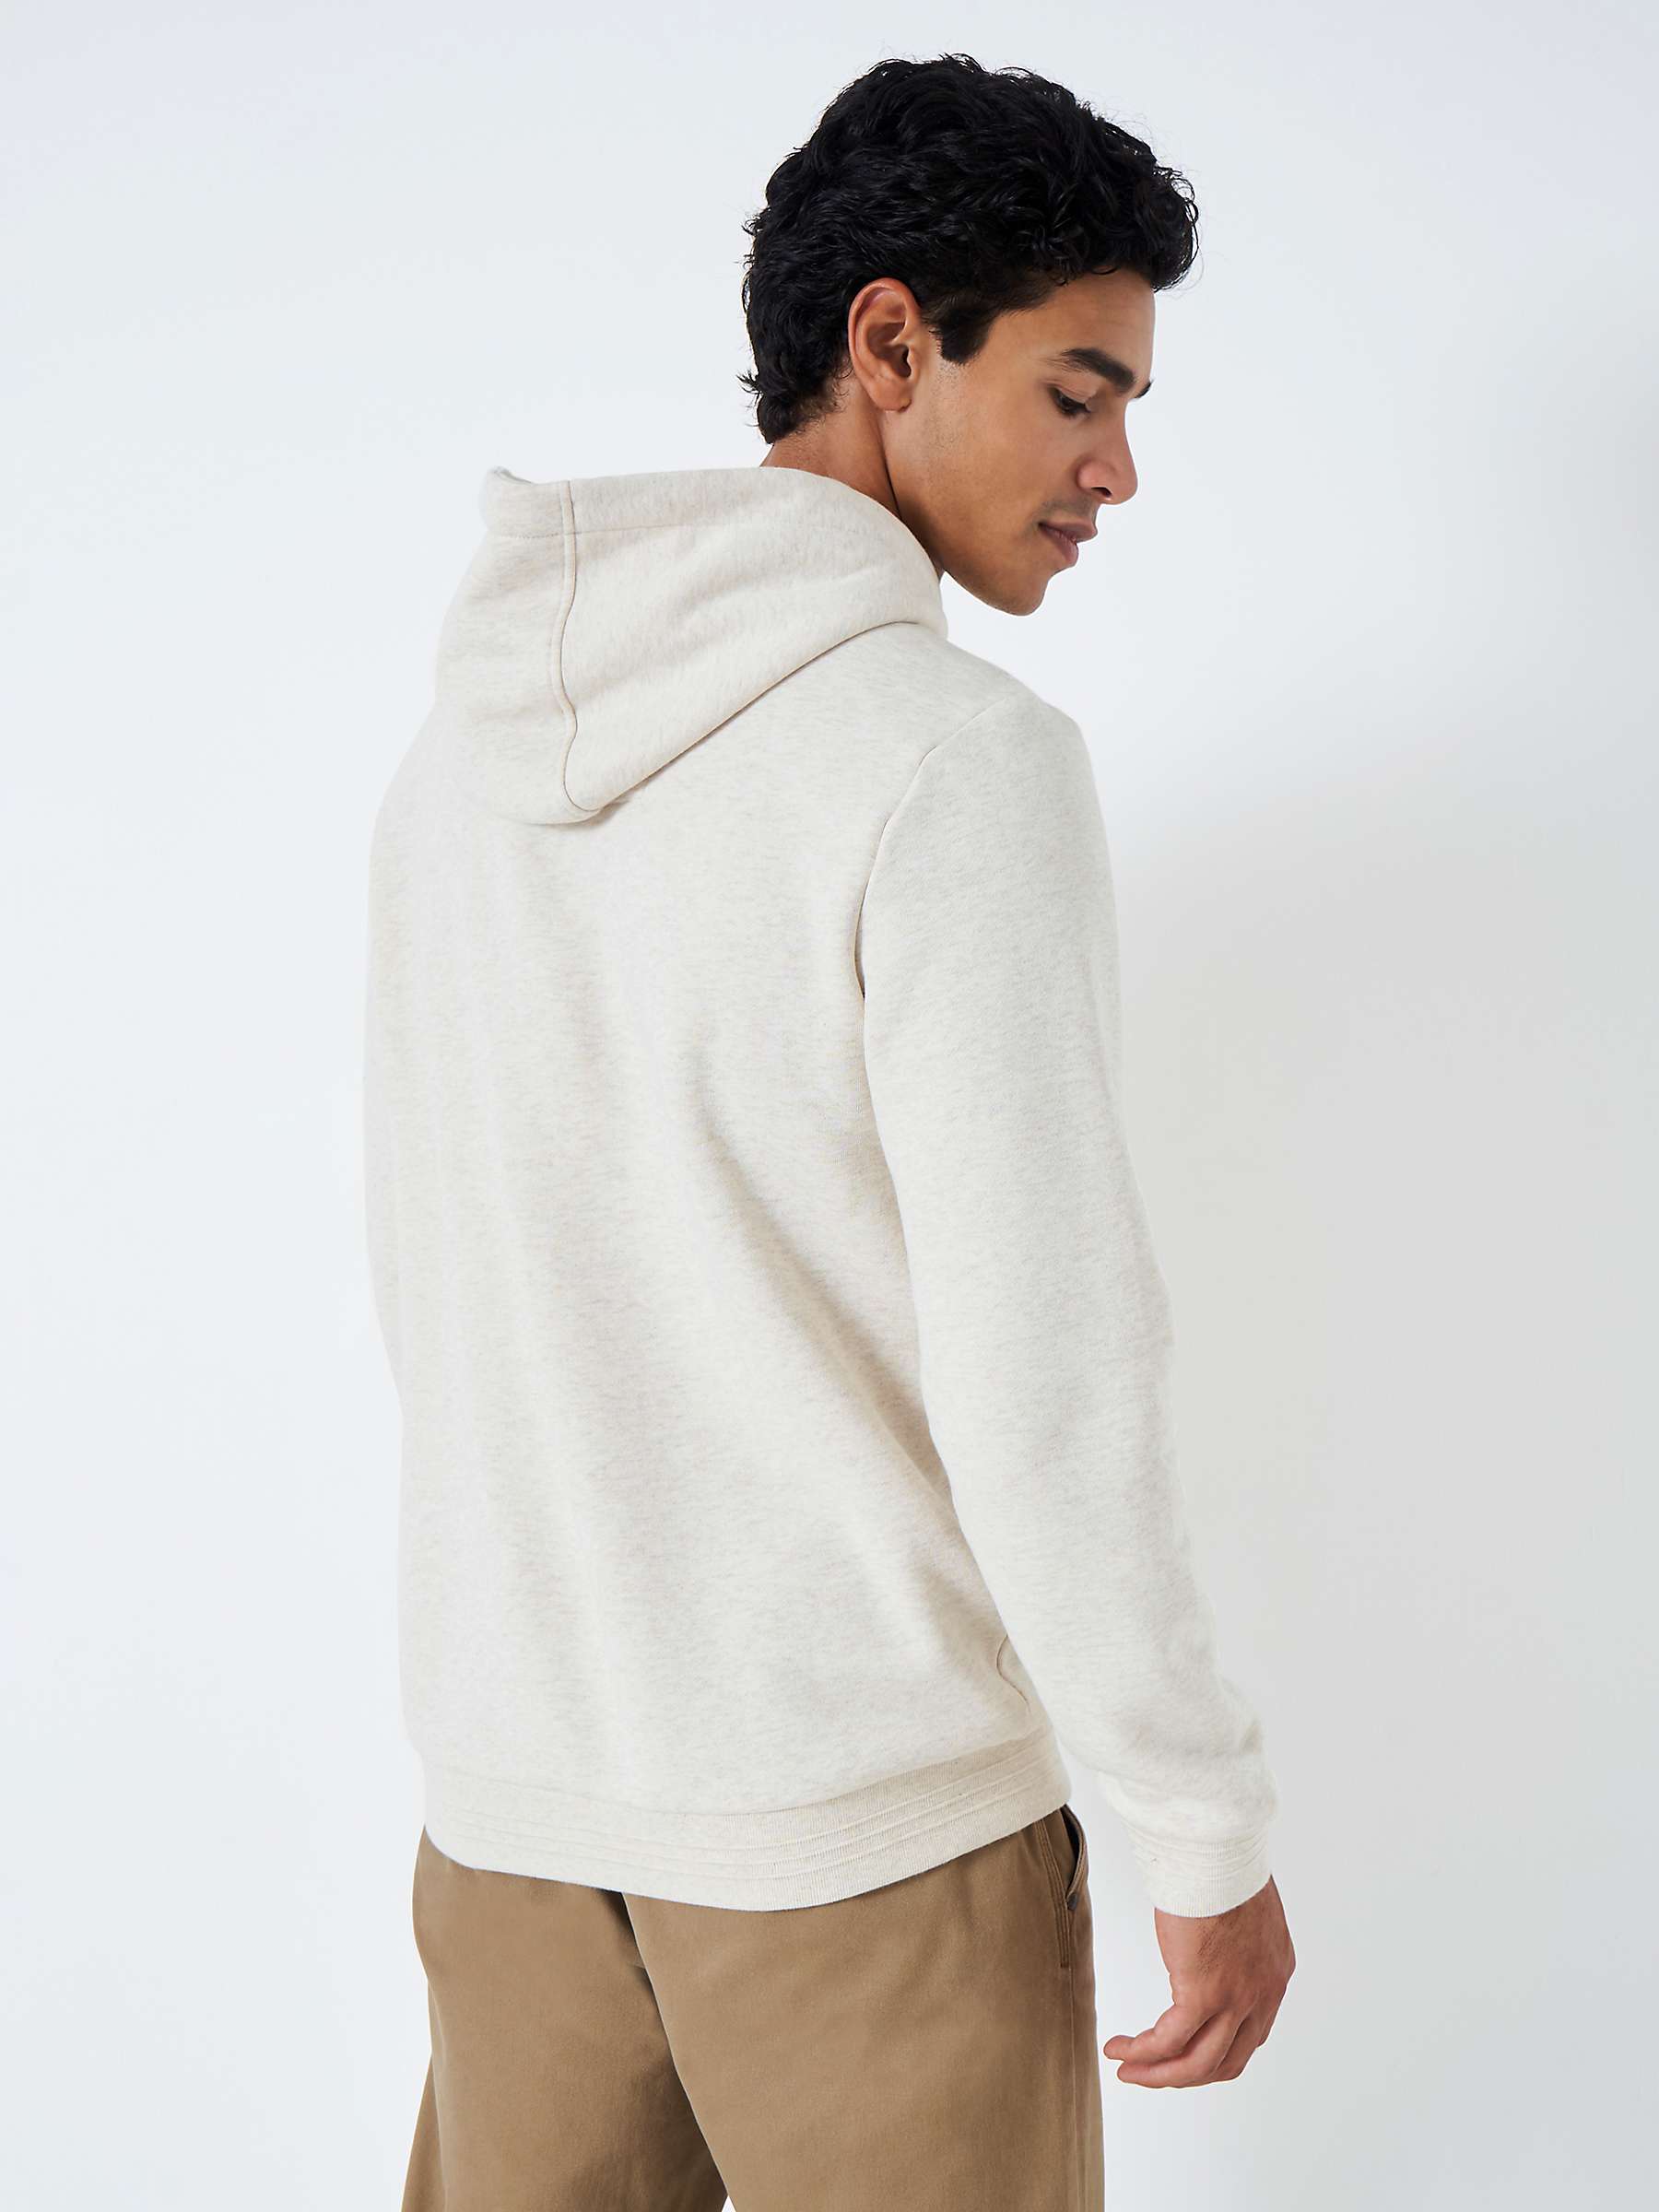 Buy Crew Clothing Graphic Hoody, Oatmeal/Multi Online at johnlewis.com